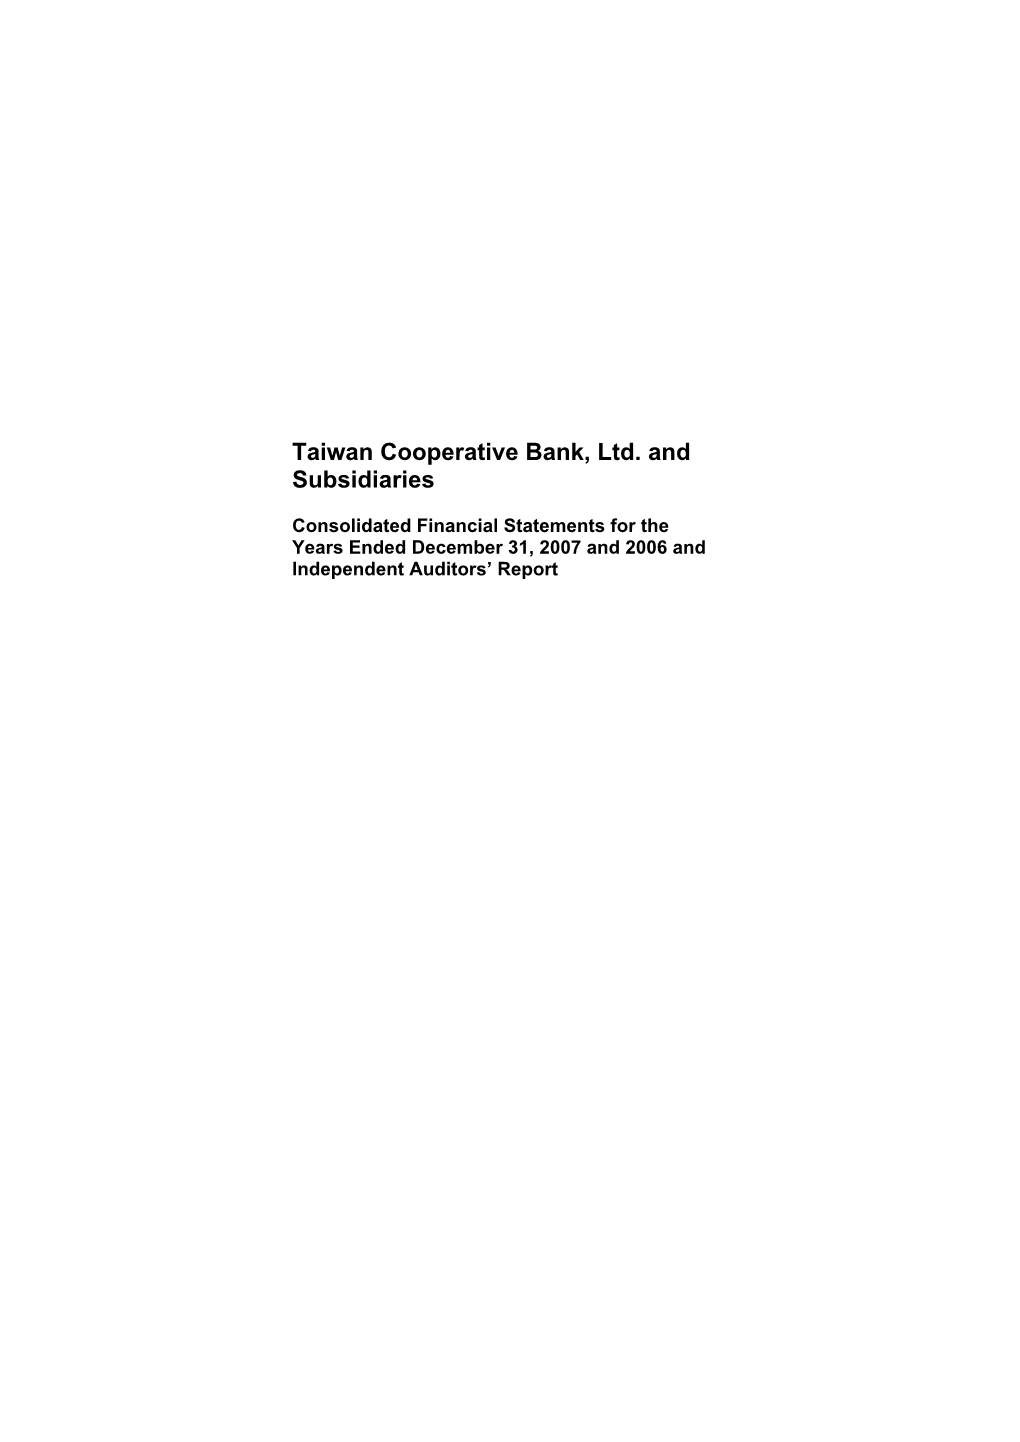 2007 Consolidated Financial Statements